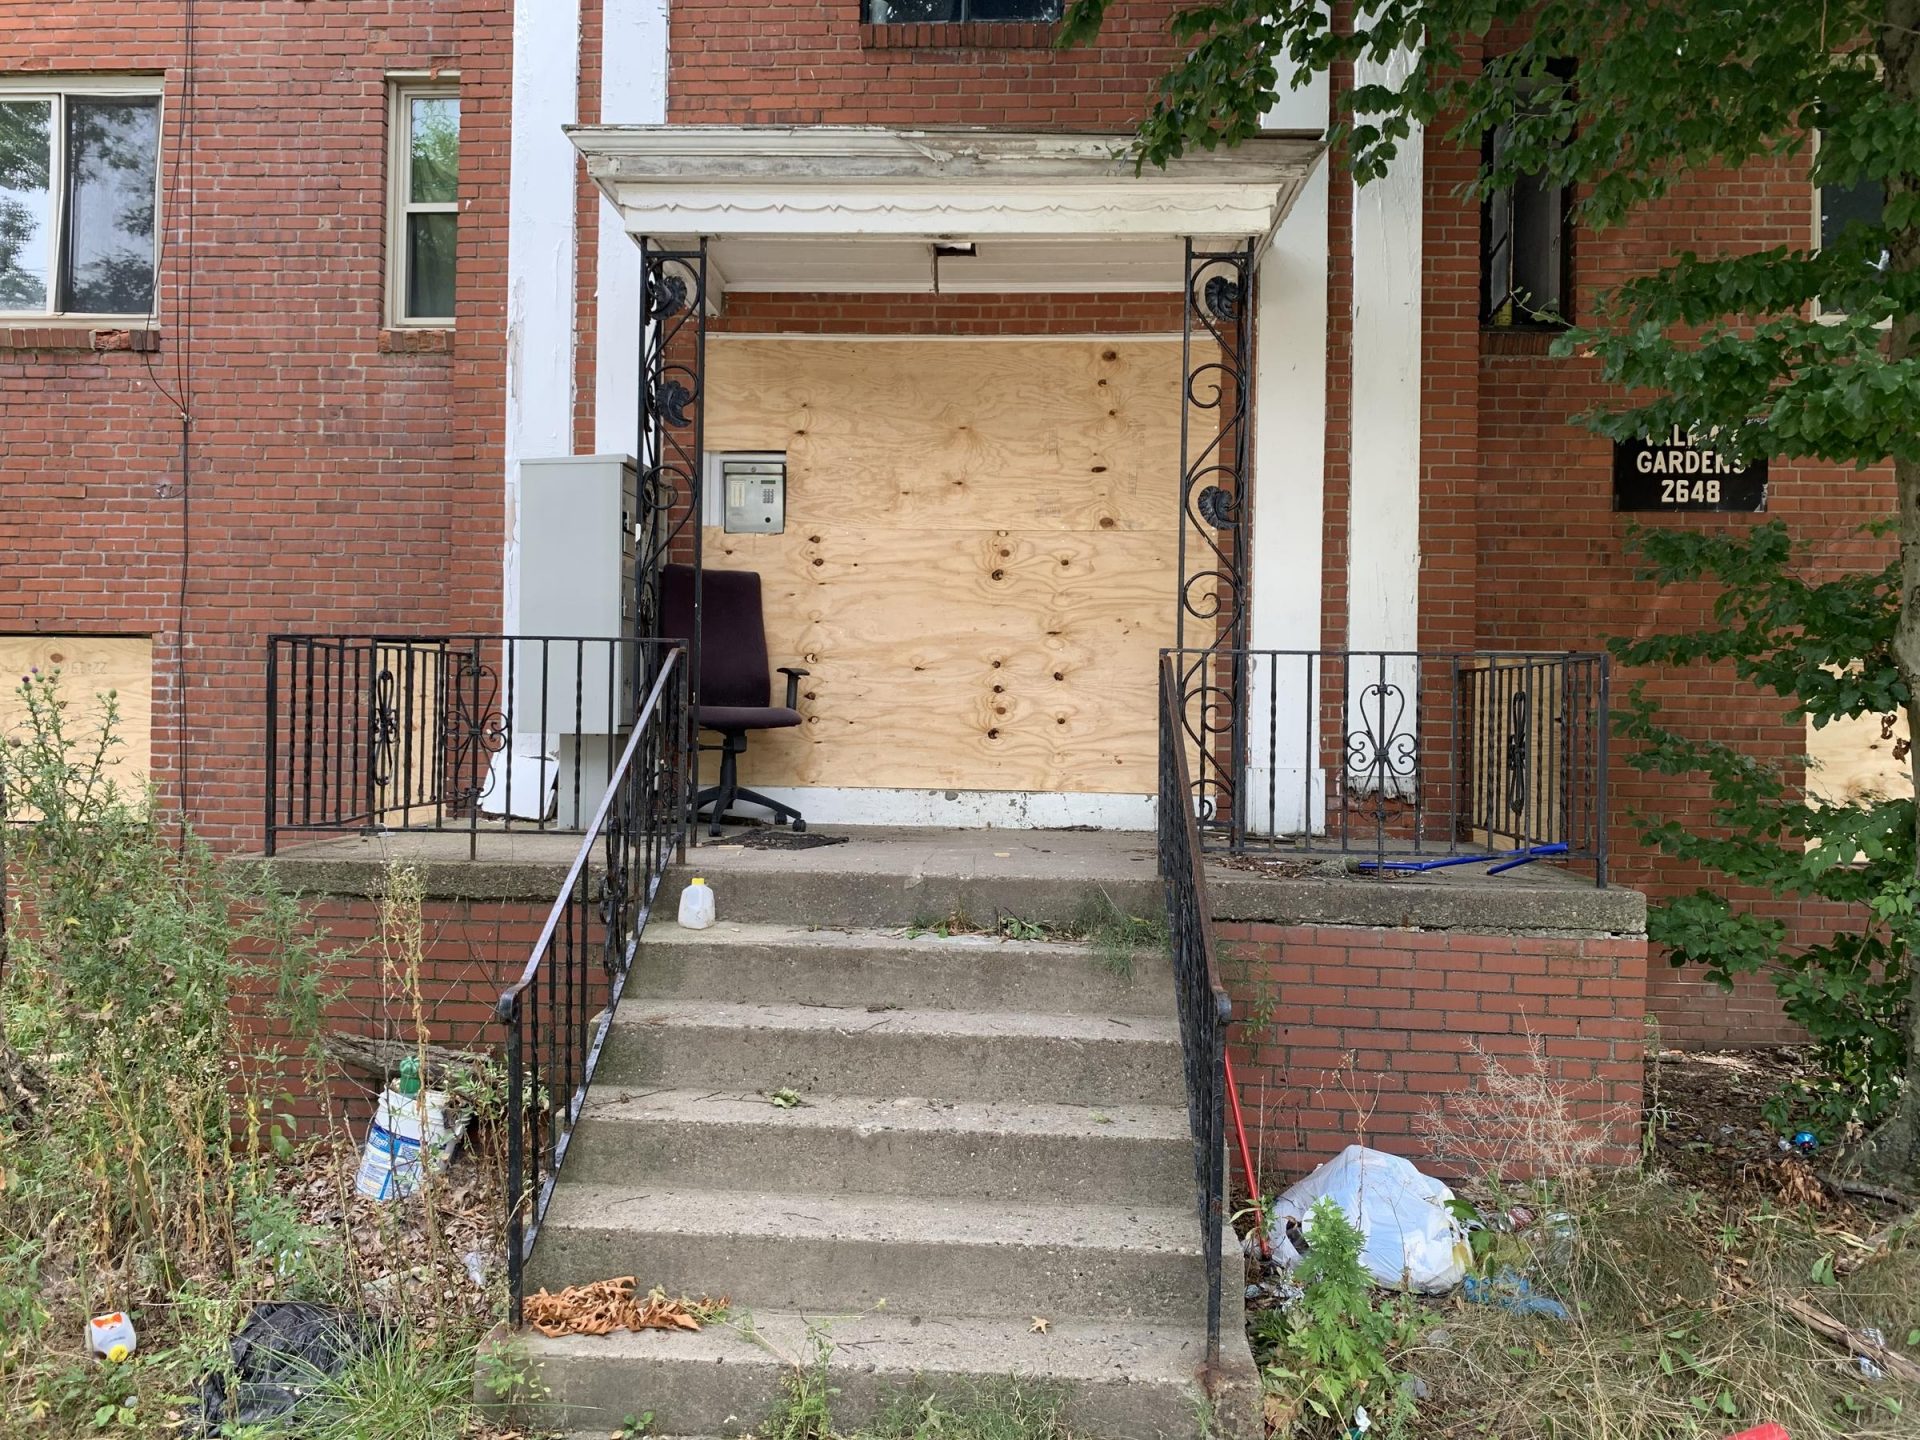 Residents have vacated all but one of Valmar Garden's four apartment buildings. Penn Hills authorities have boarded up many of the structures' windows and doorways.